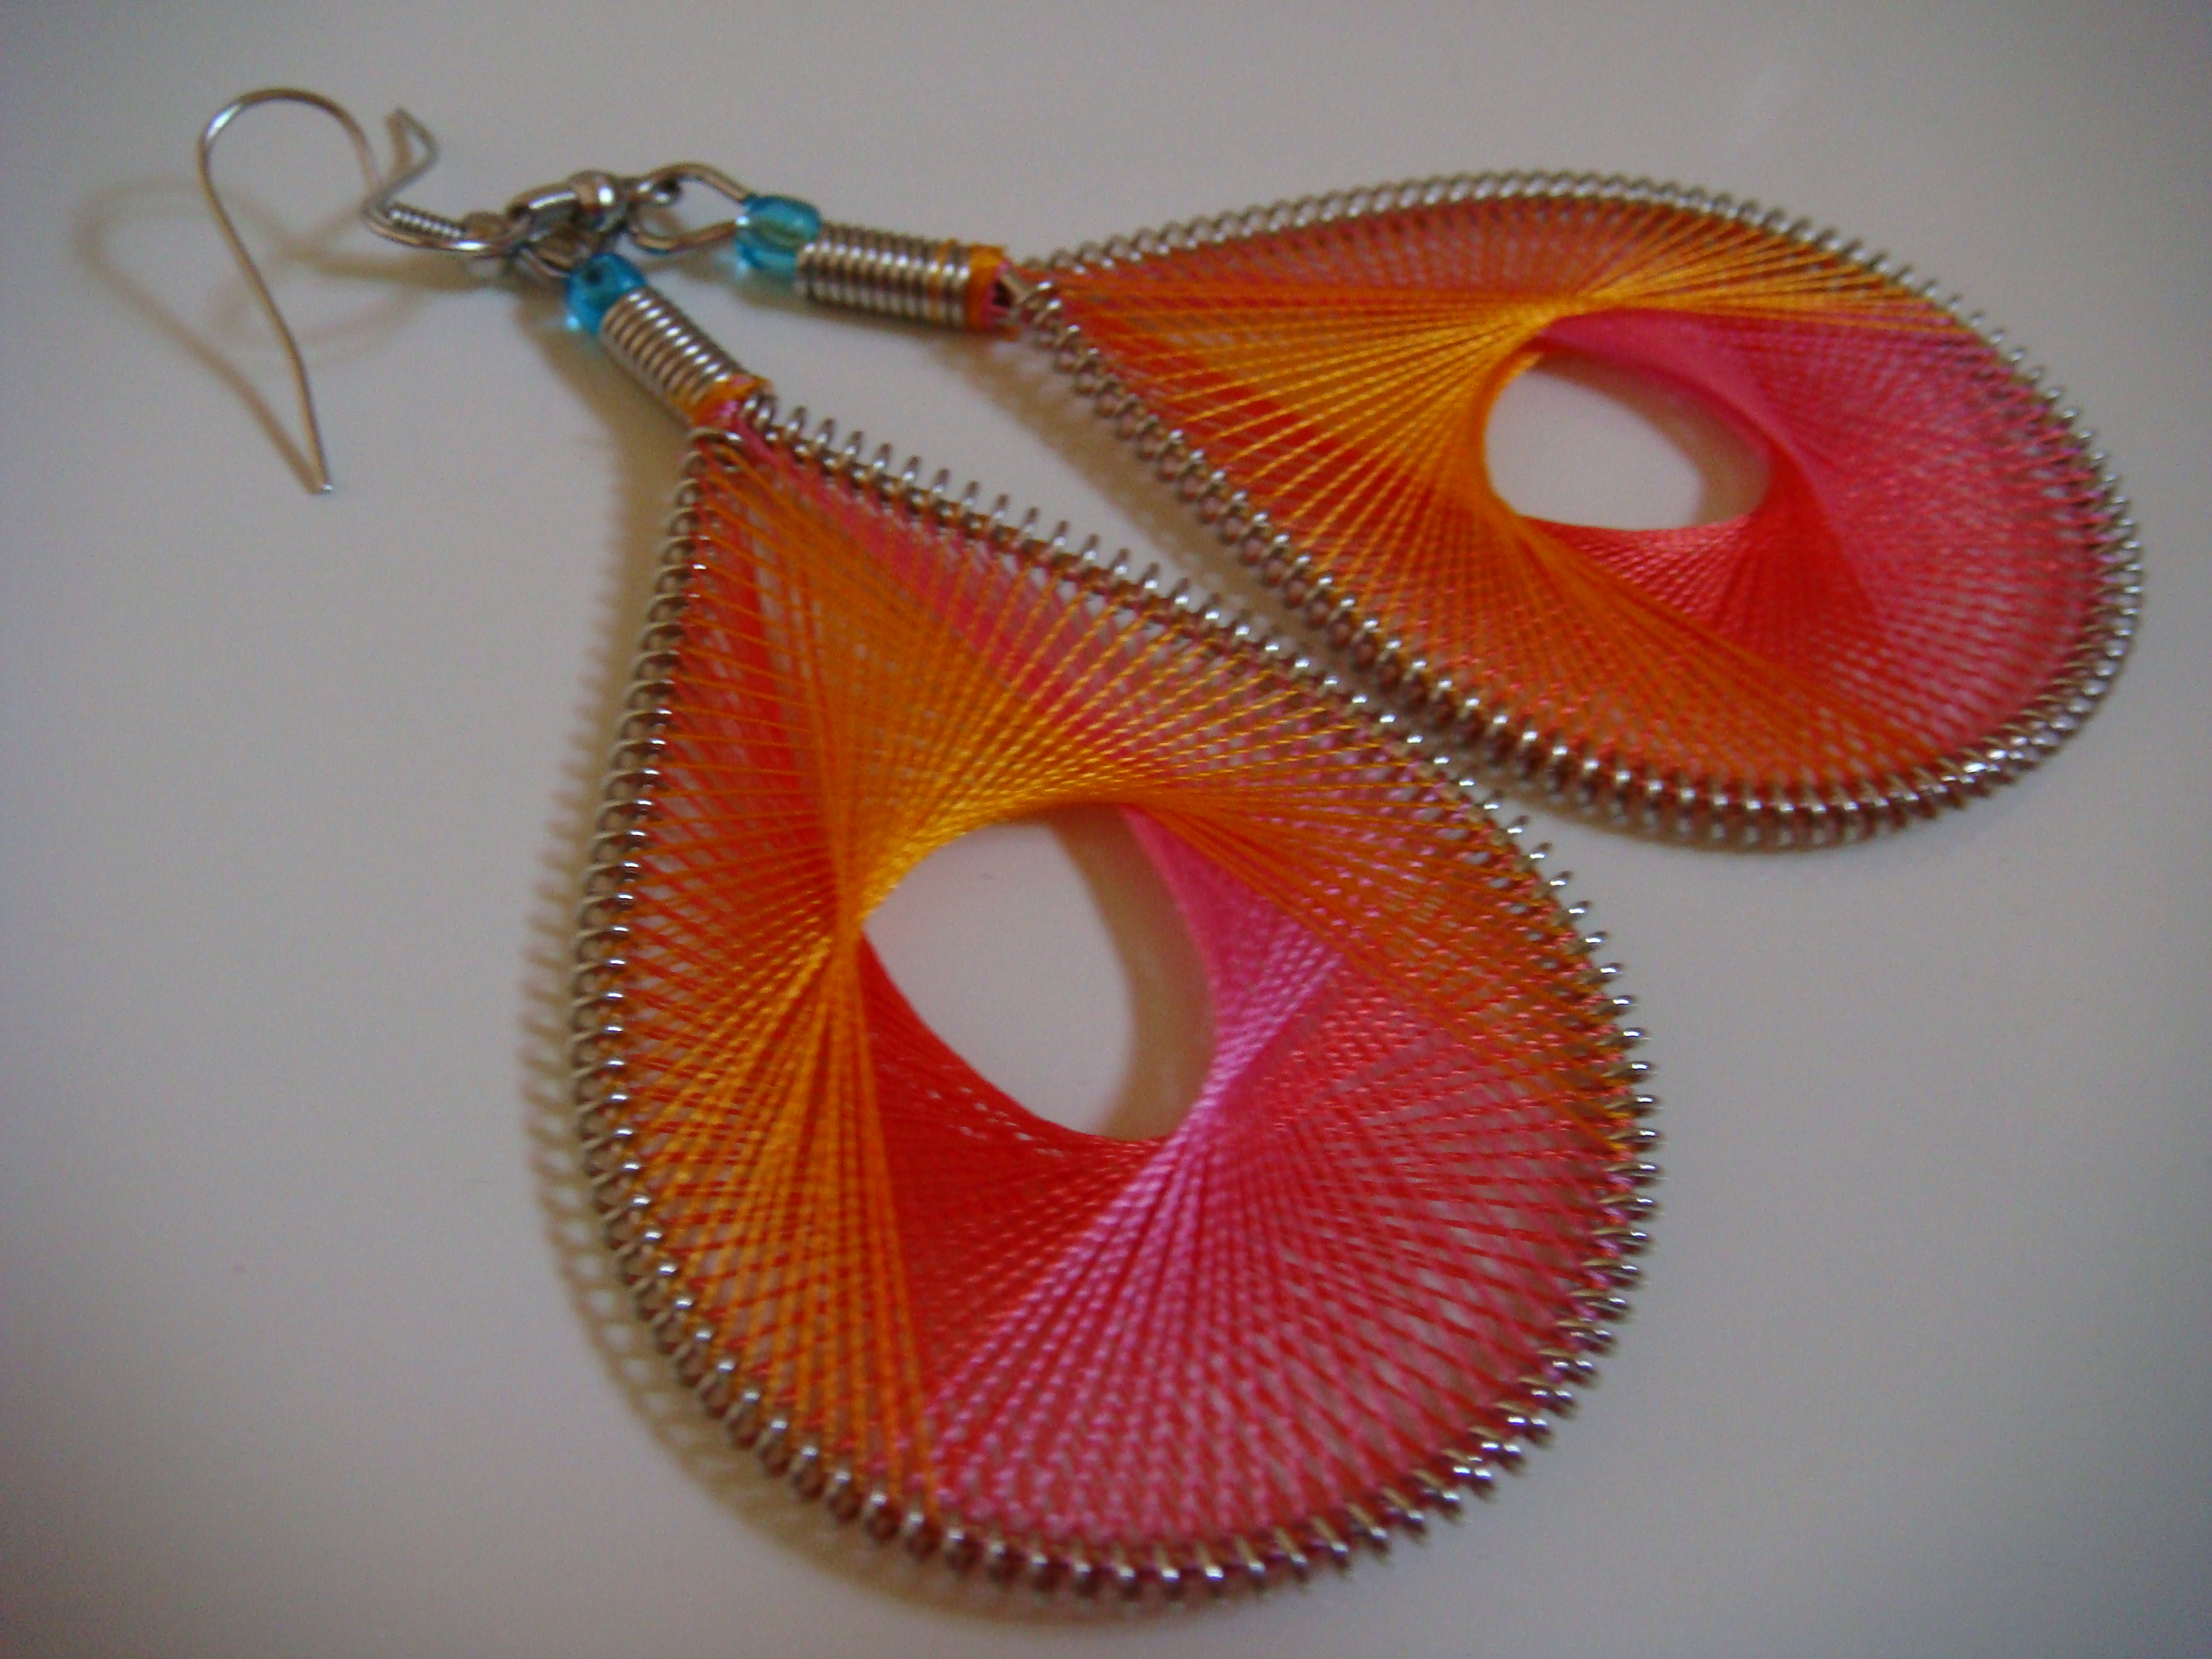 Threaded Earrings on Awesome Ebay Find  Coral Threaded Earrings    Sophie S Dish